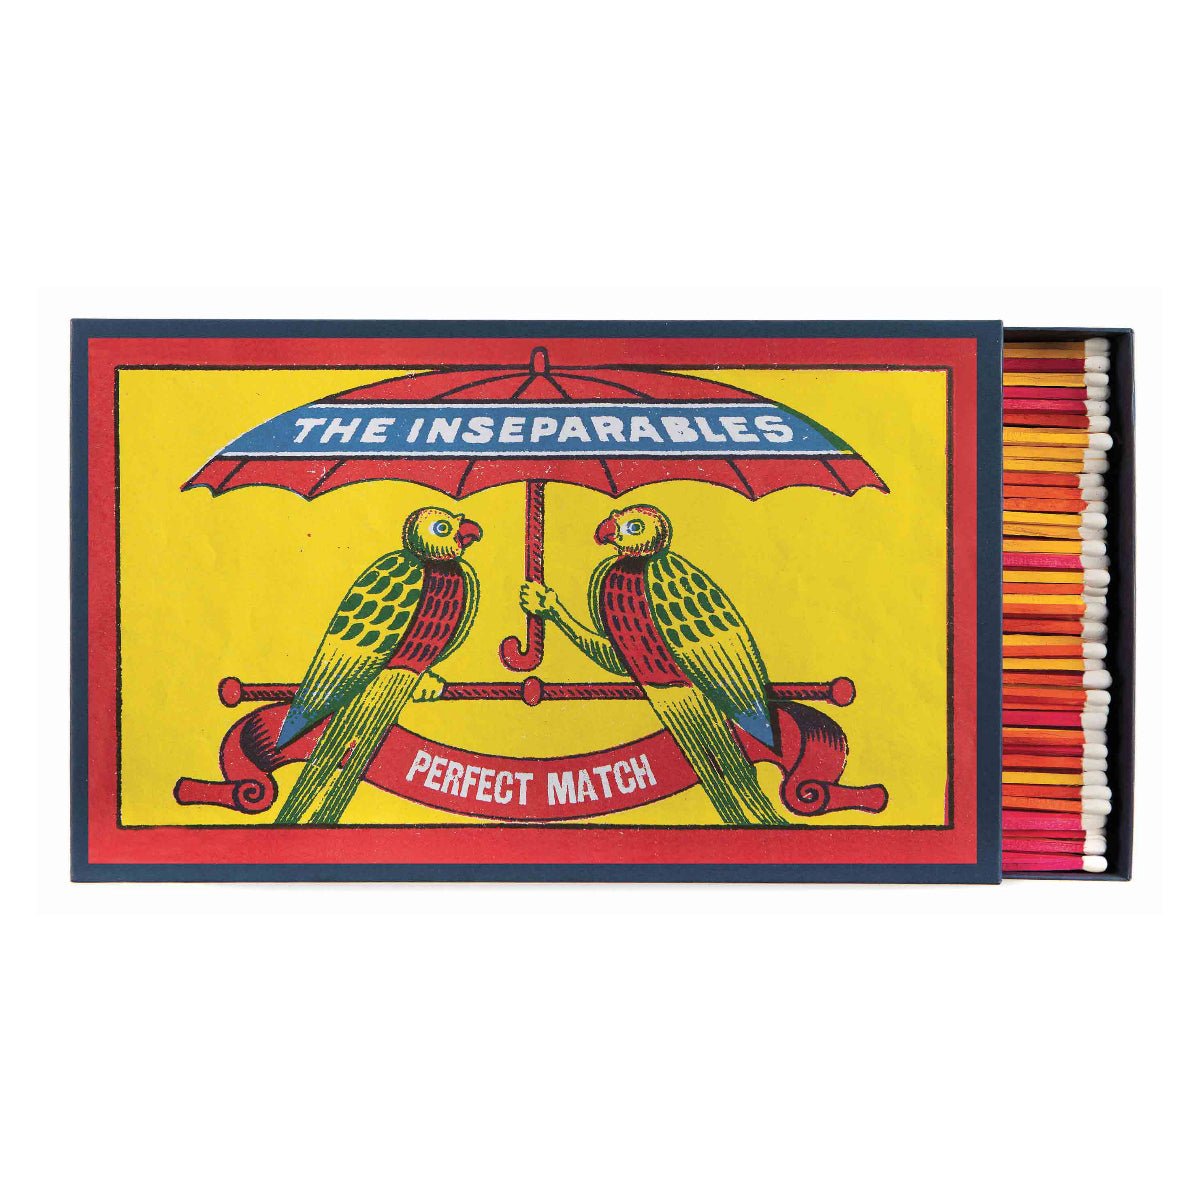 Luxury Giant Matches - The Inseparables - Life of Riley